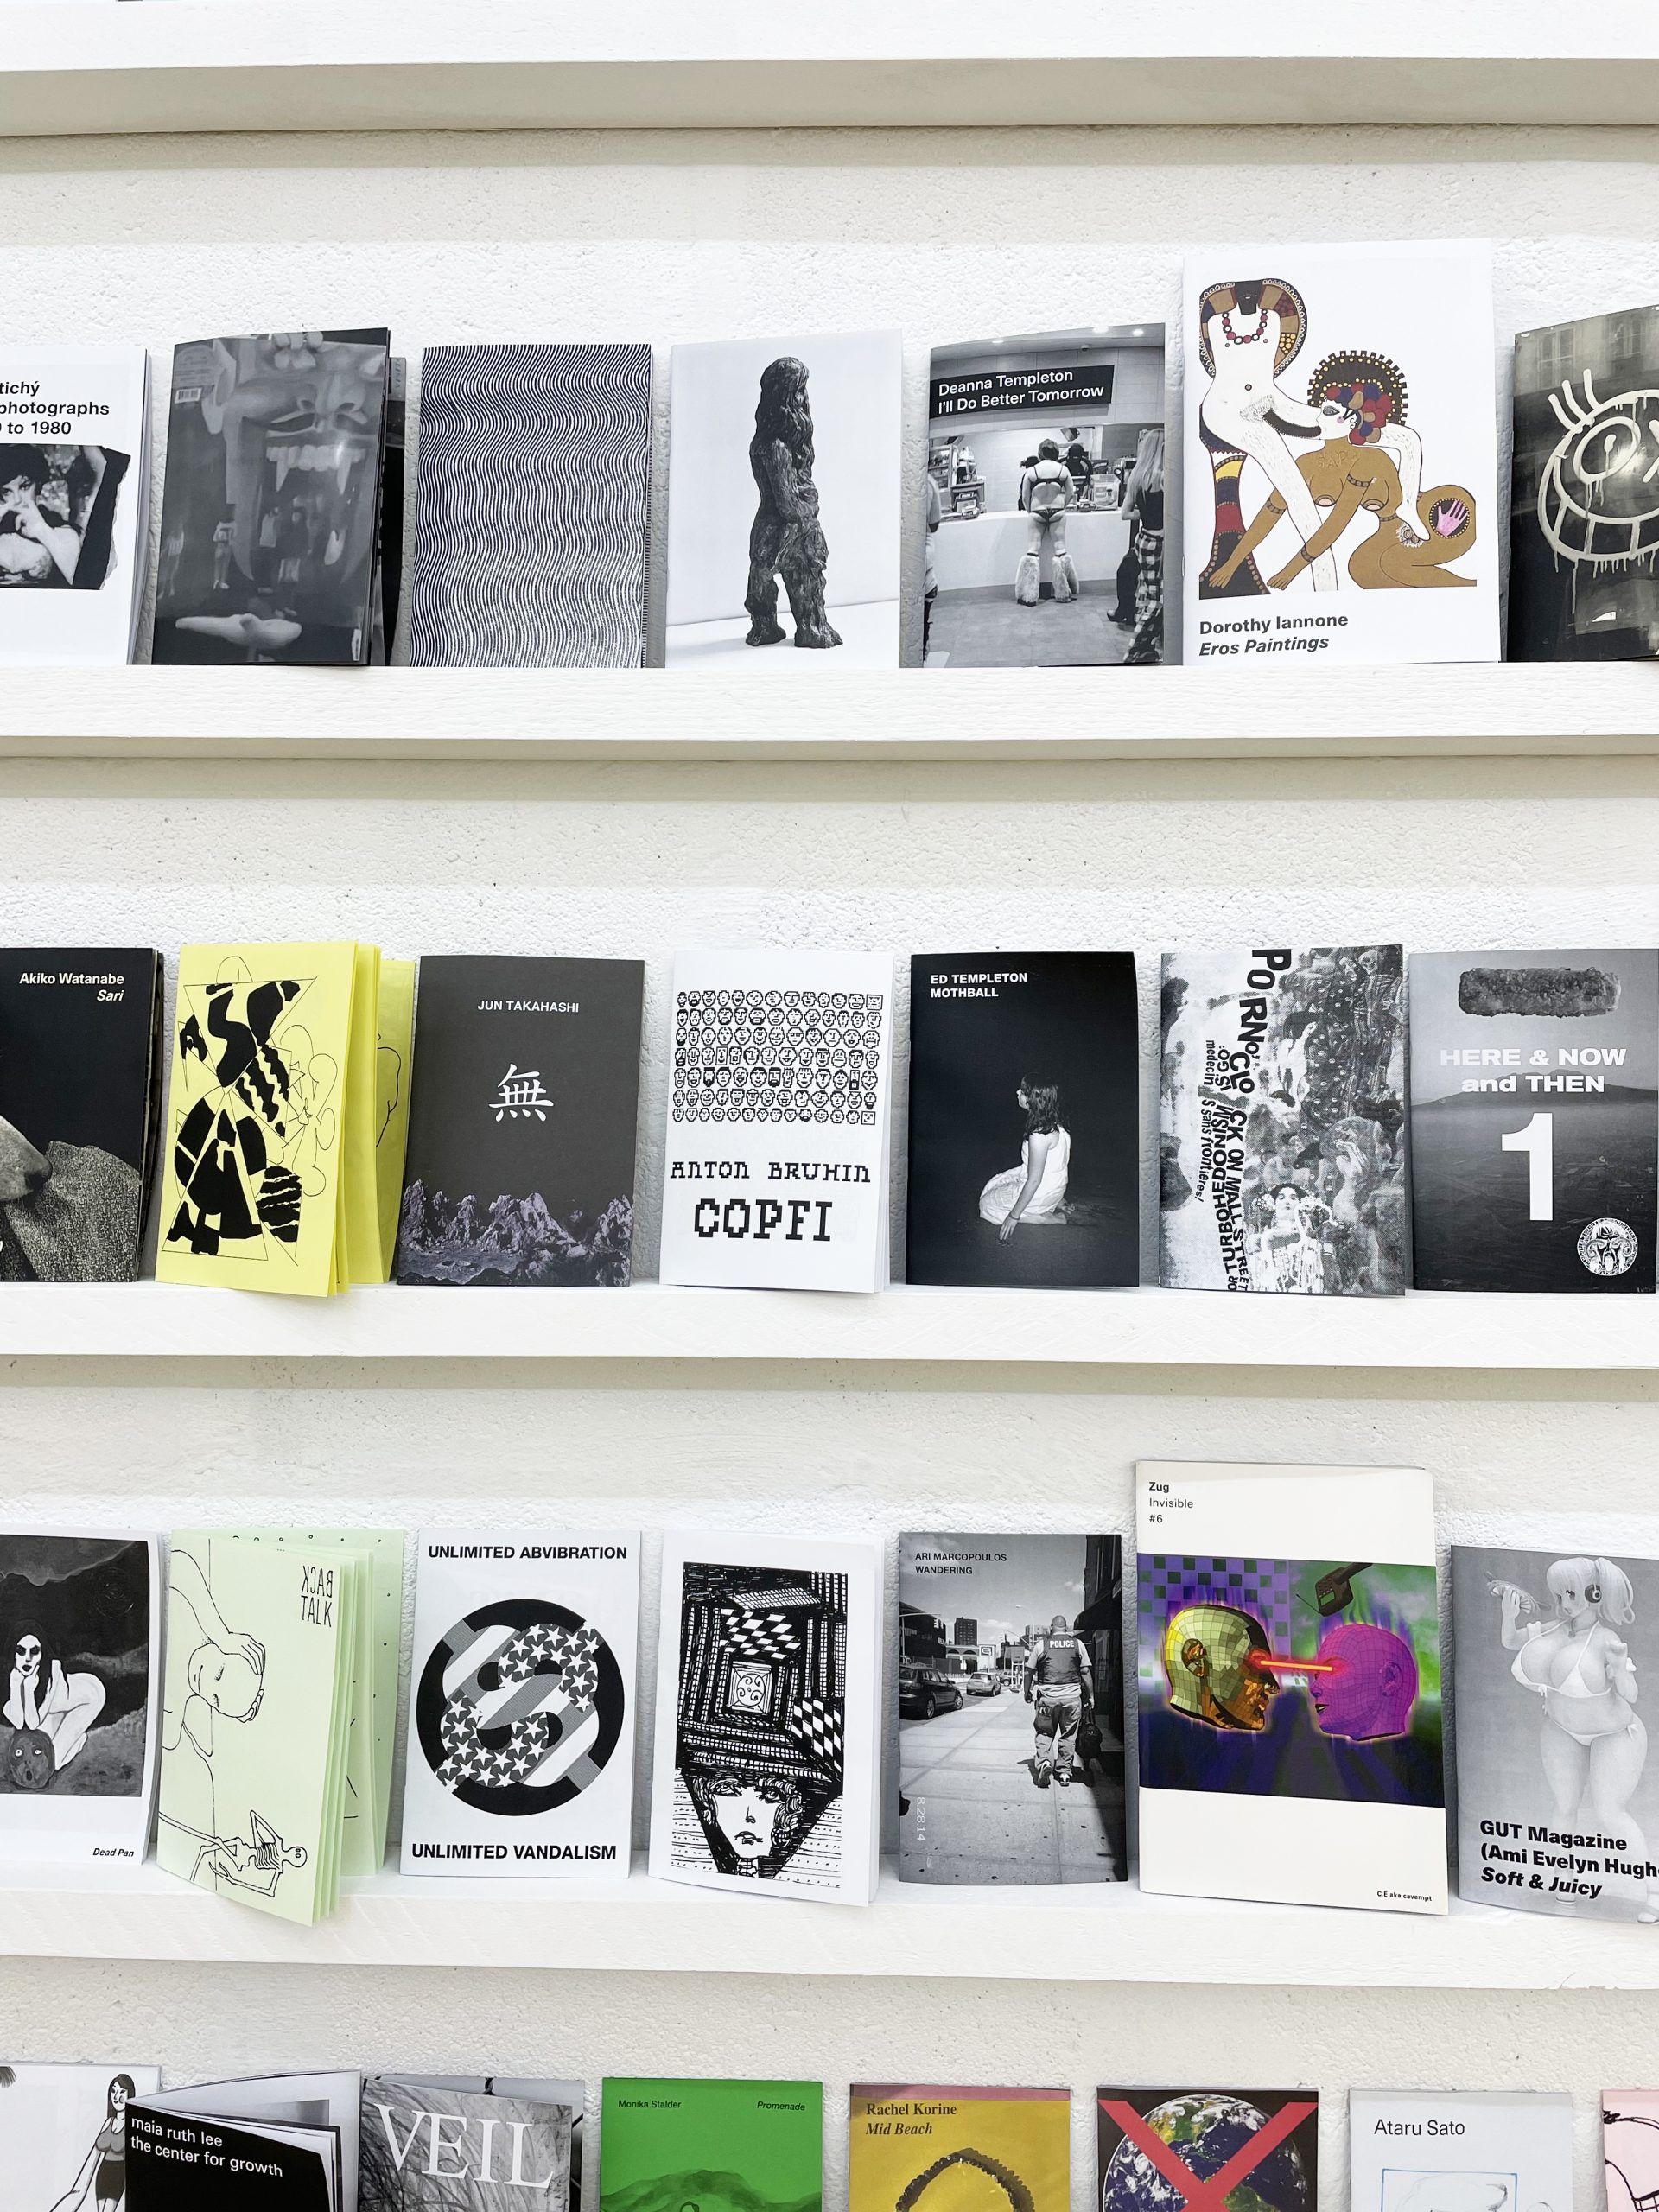 Eighteen Years of Connecting Artists and the Scene:
Aaron Fabian of innen Talks about ZINE Culture